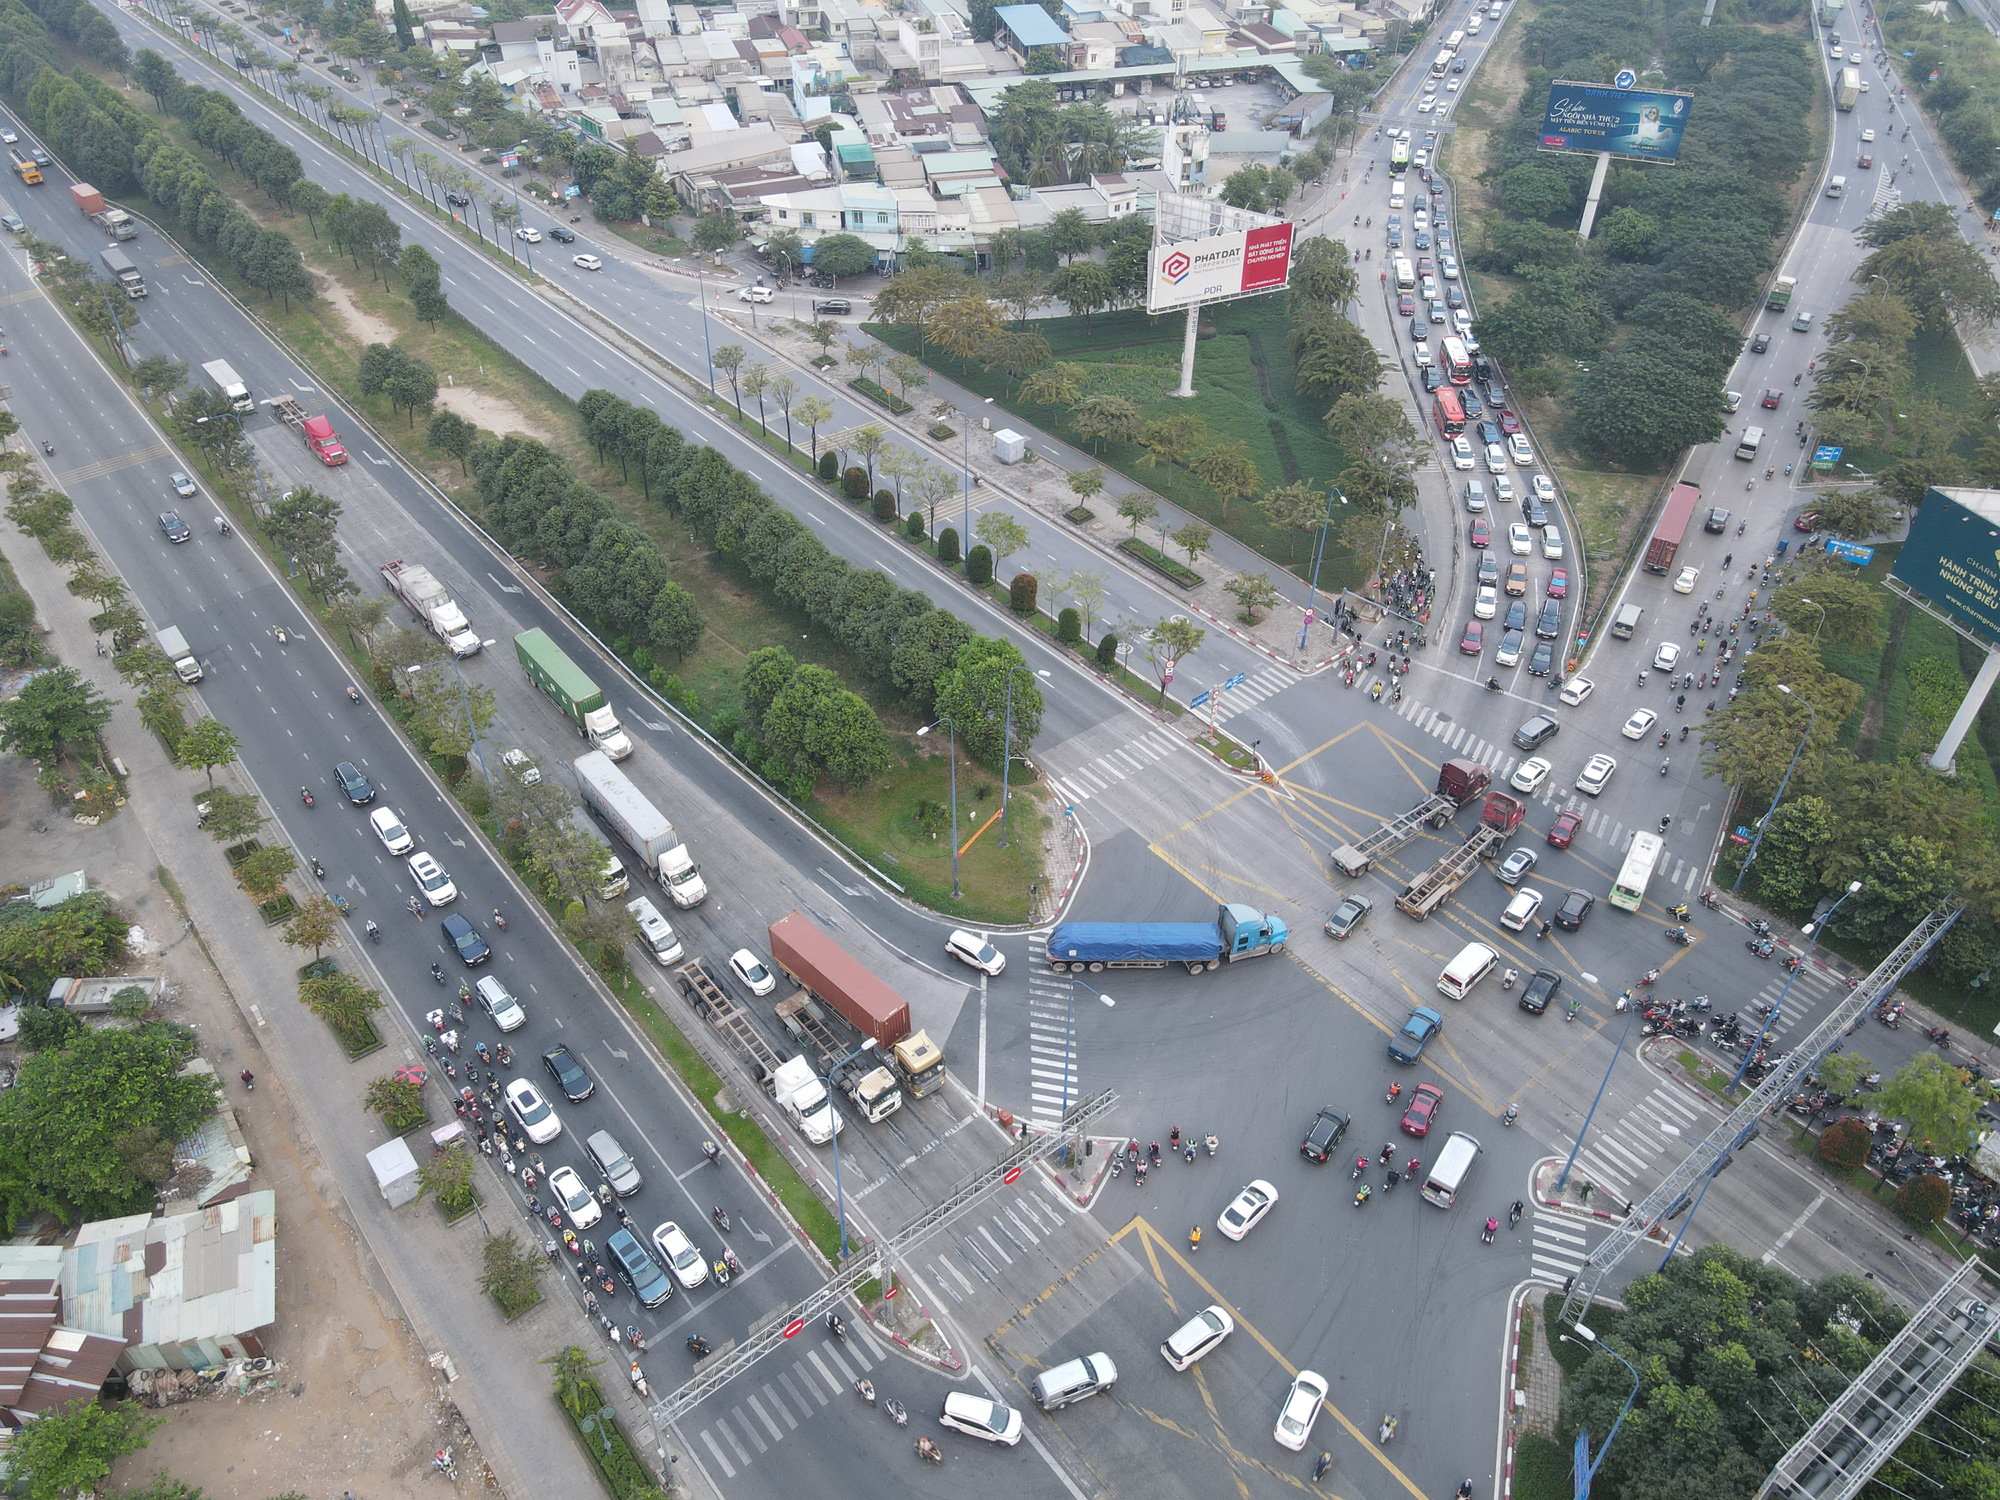 A birds-eye view of the An Phu Interchange in Thu Duc City, Ho Chi Minh City. Photo: Le Phan / Tuoi Tre